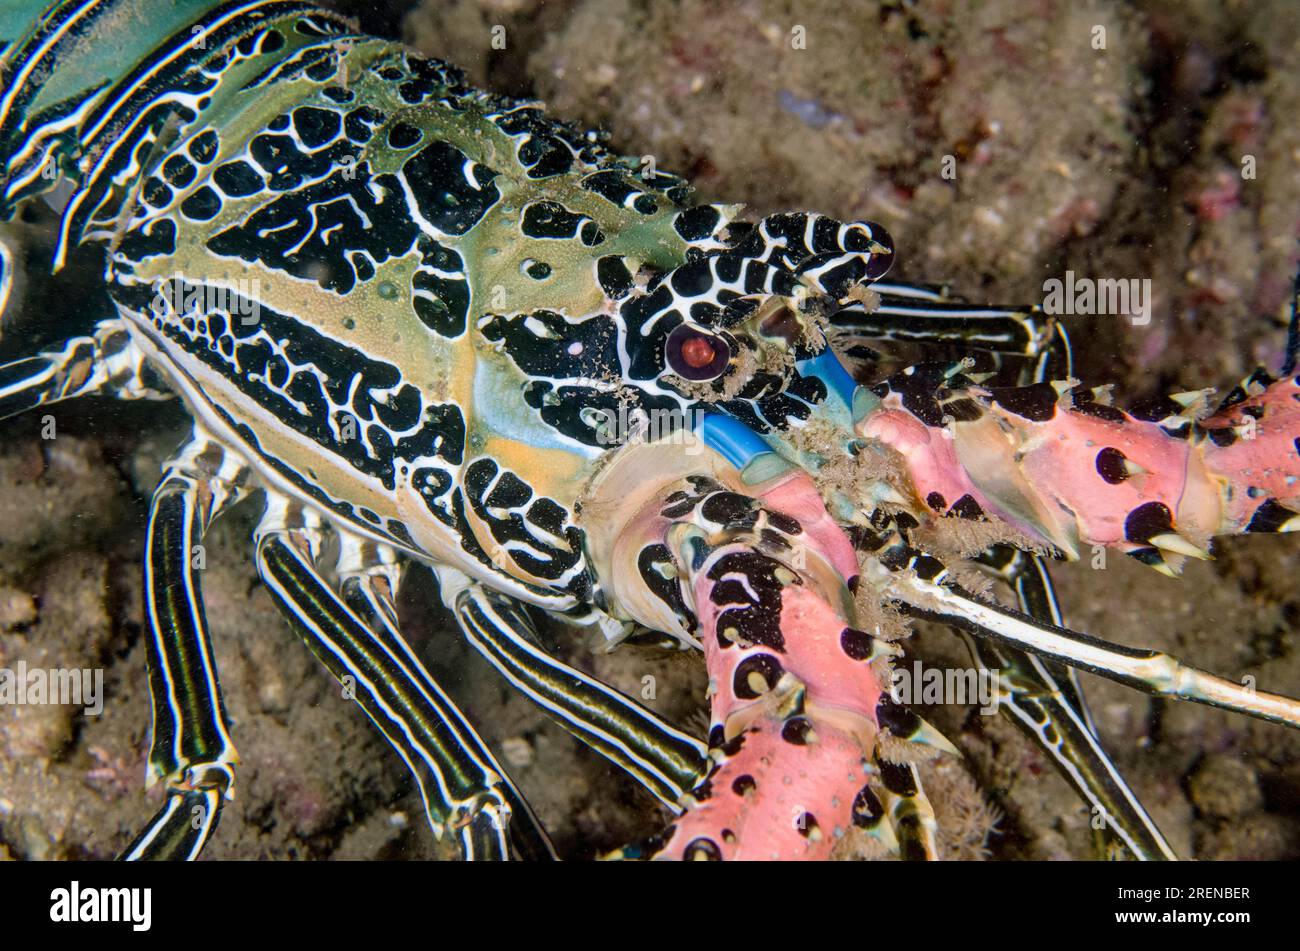 Painted Spiny Lobster, Panulirus versicolor, night dive, Dili Rock East dive site, Dili, East Timor Stock Photo